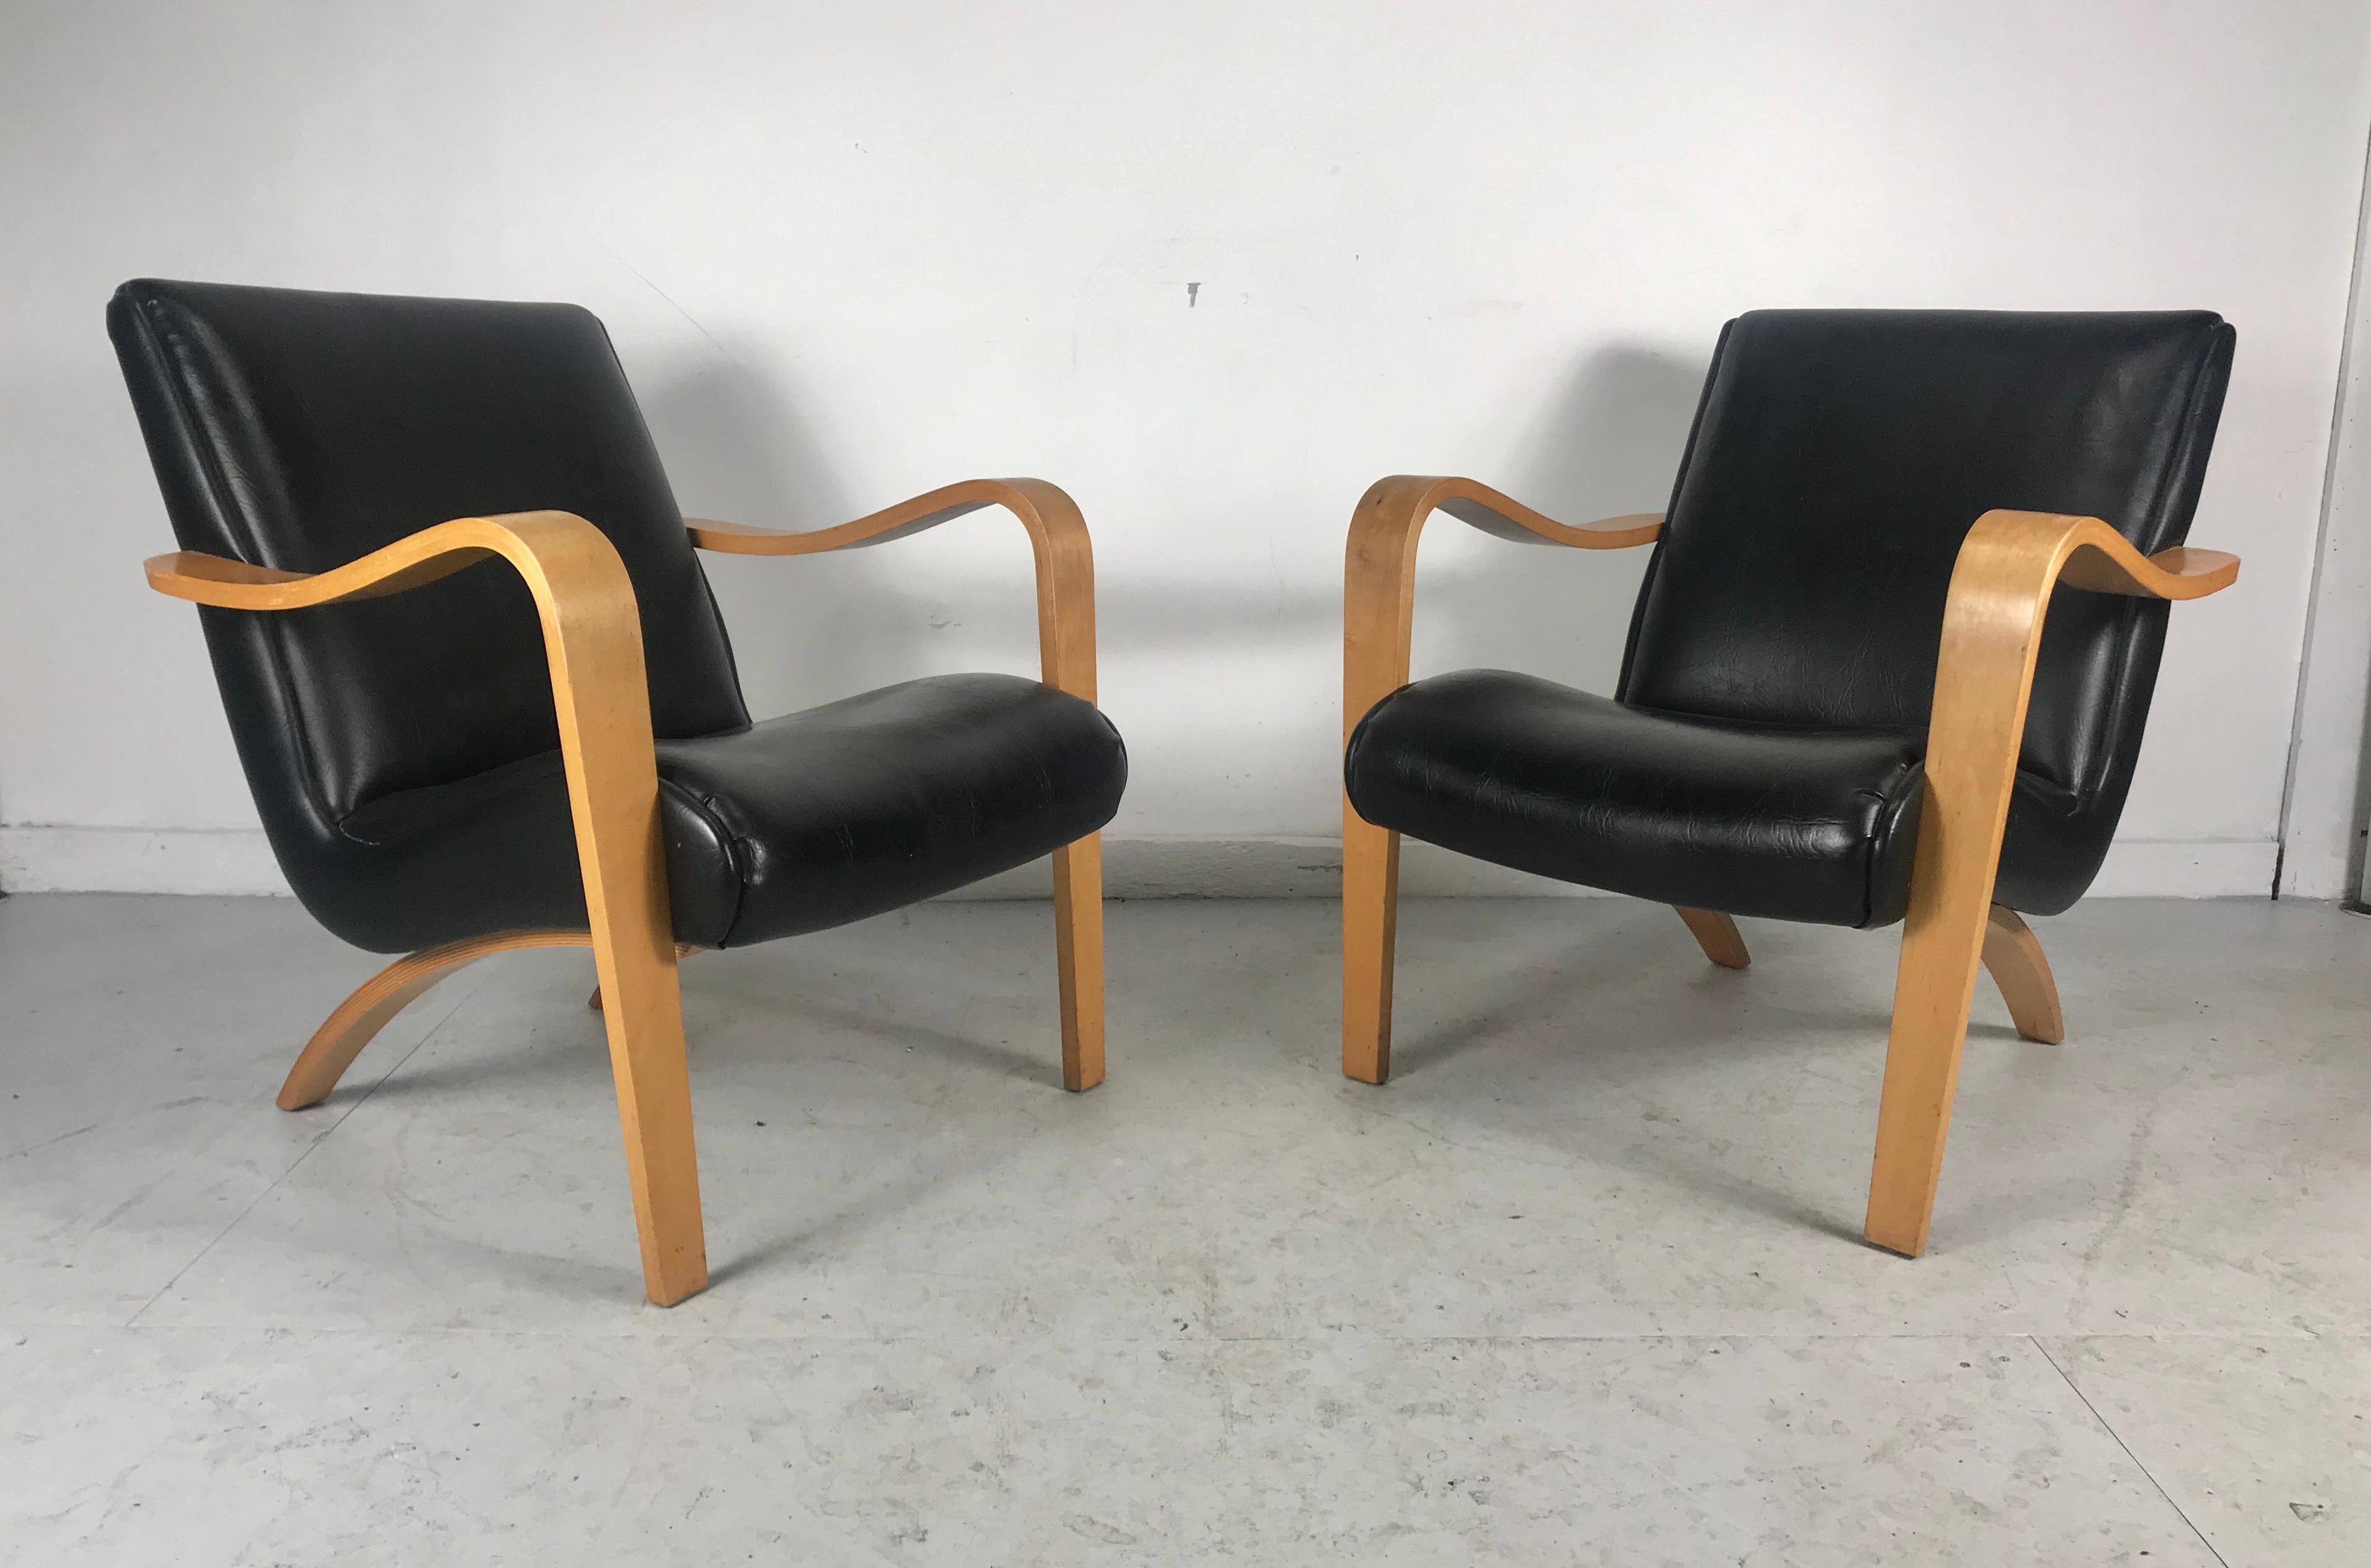 The shapely design of this pair of Thonet lounge chairs features stylish modern design, contrasting black Naugahyde and ergonomic design. Extremely comfortable seats make a unique addition to any modernist, contemporary or eclectic environment, hand